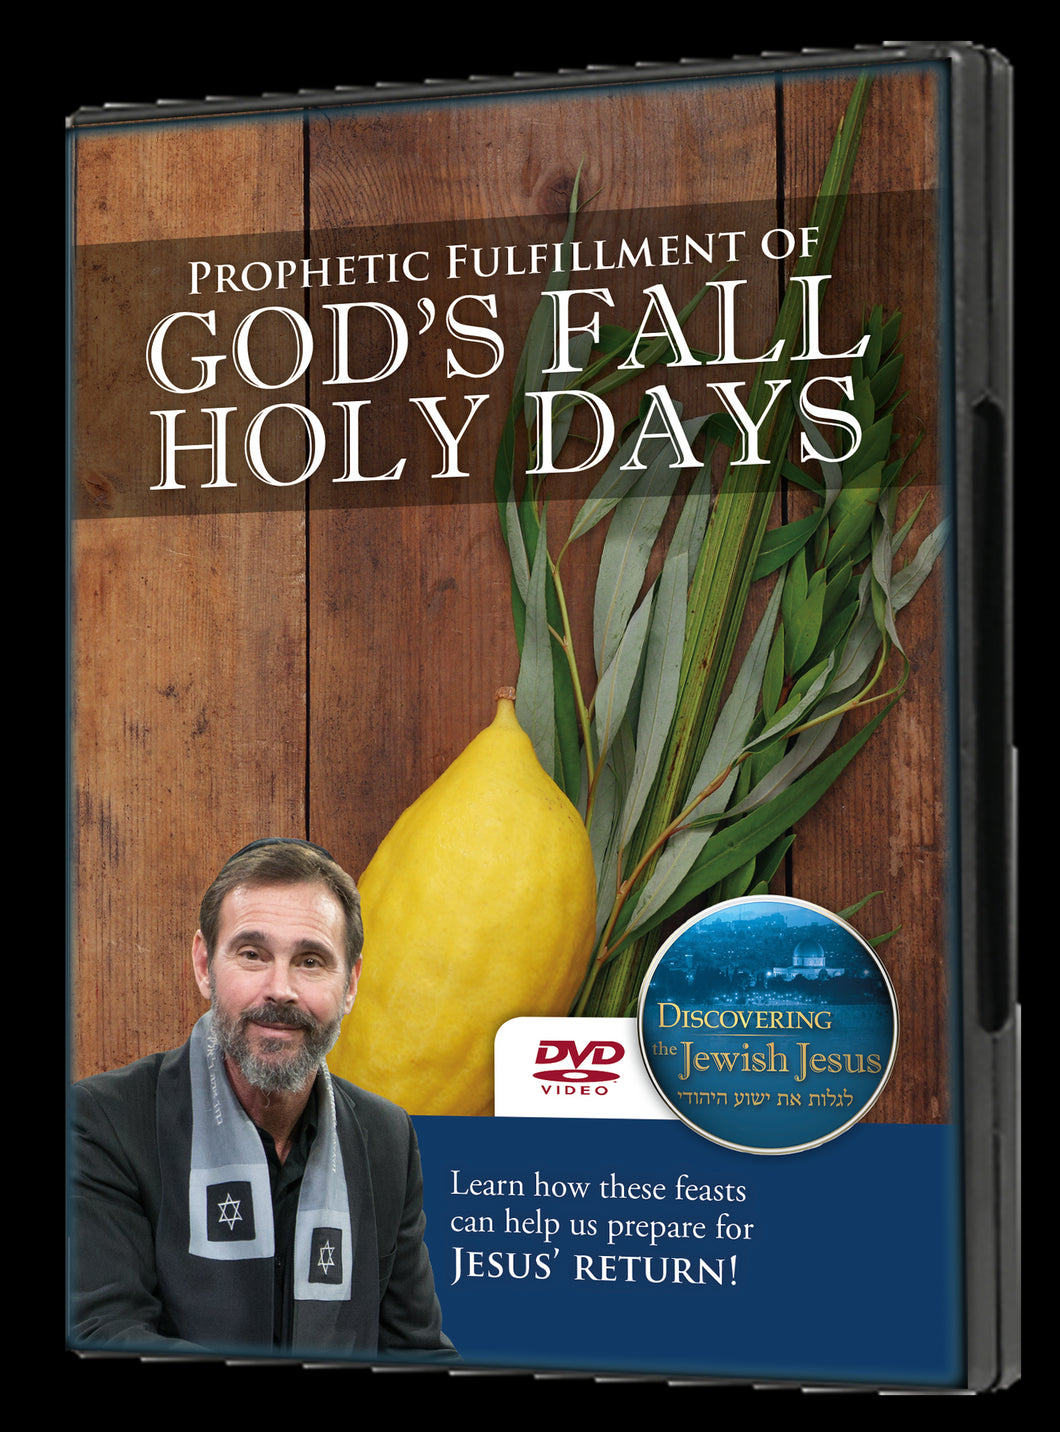 Prophetic Fulfillment of God's Fall Holy Days